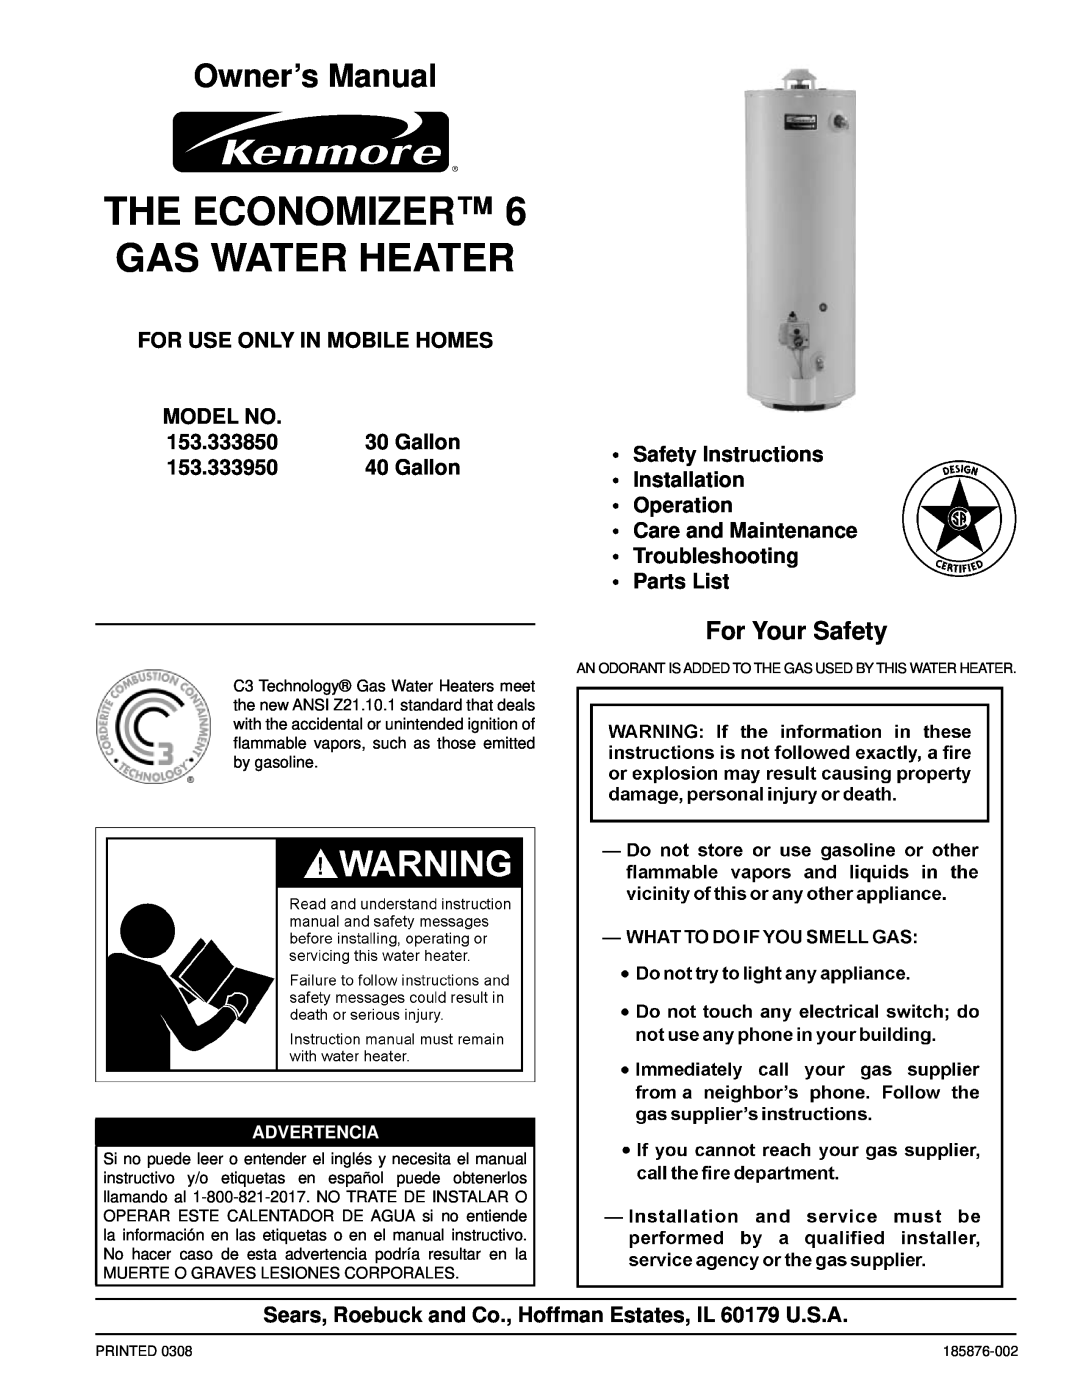 Kenmore 153.33385 owner manual For Your Safety, The Economizer Gas Water Heater, Owner’s Manual 